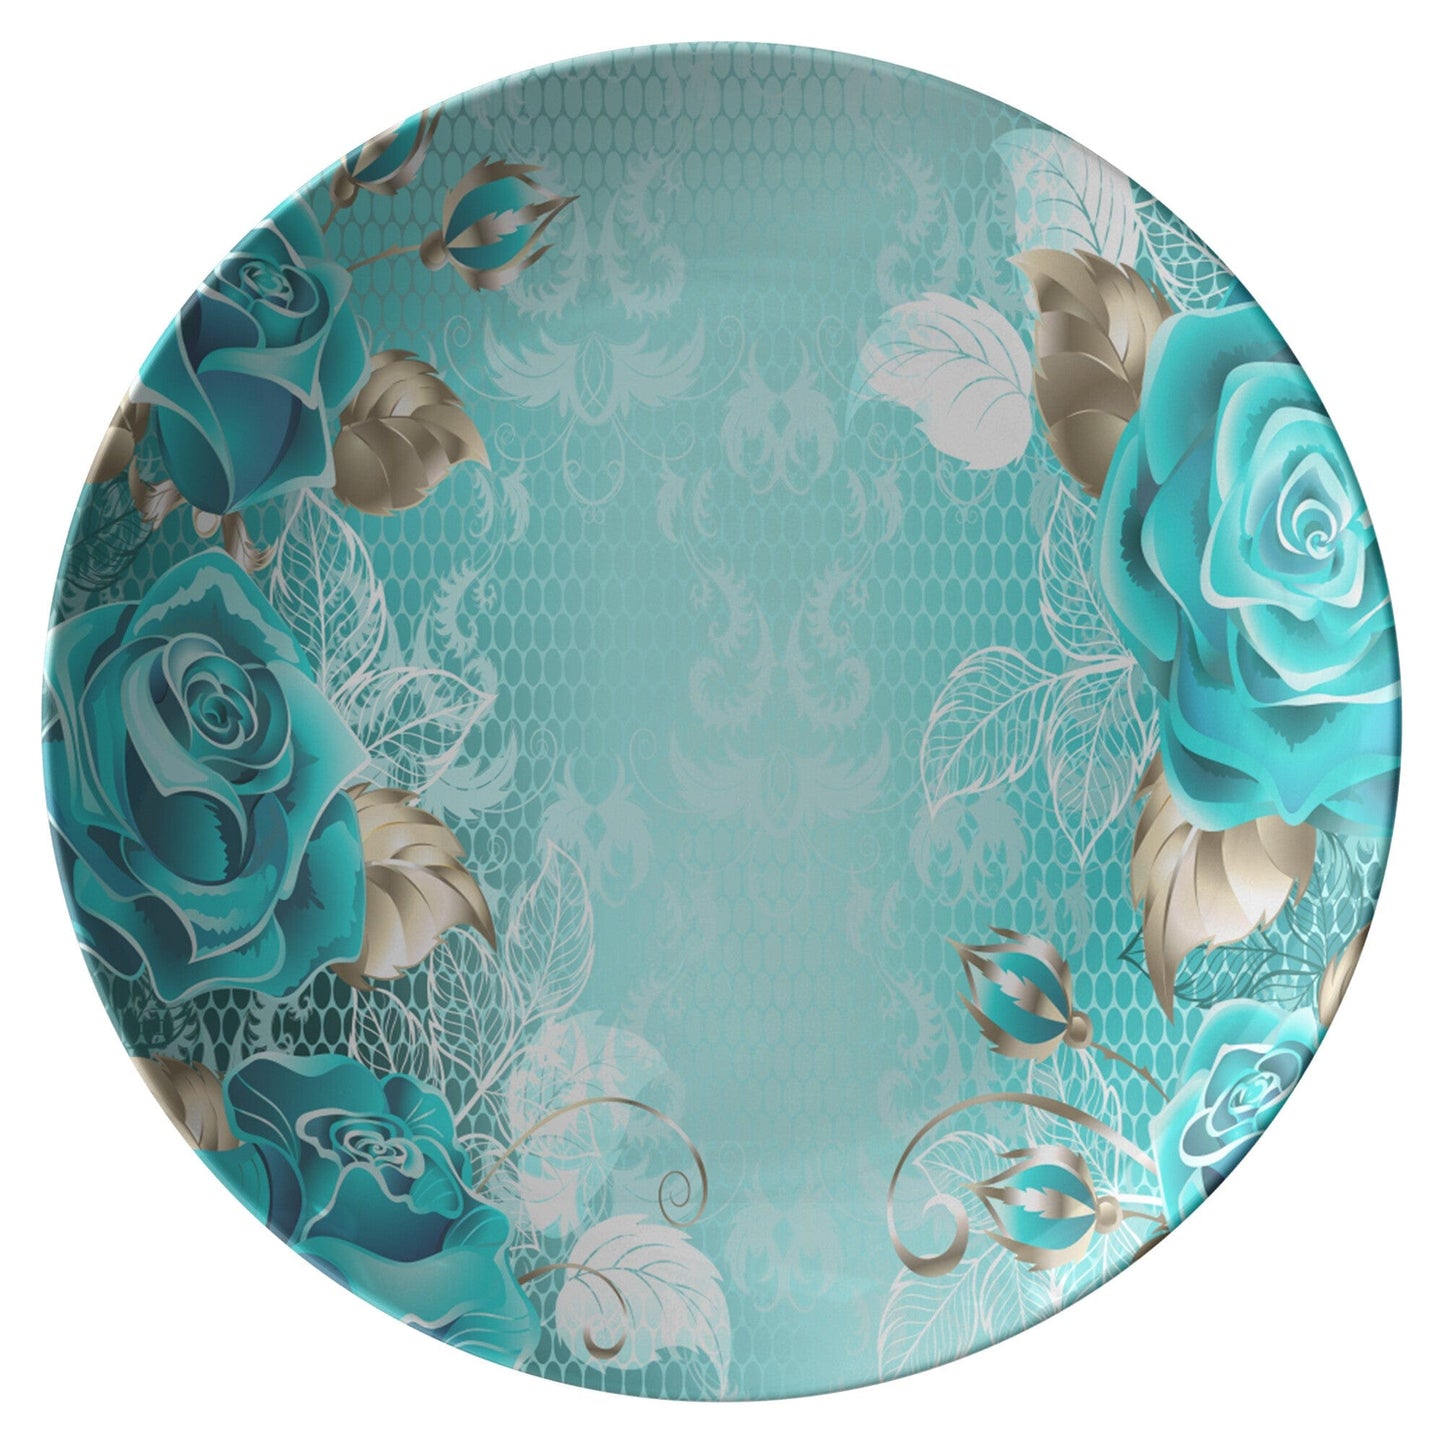 Kate McEnroe New York Turquoise Lacy Floral Dinner Plates Plates